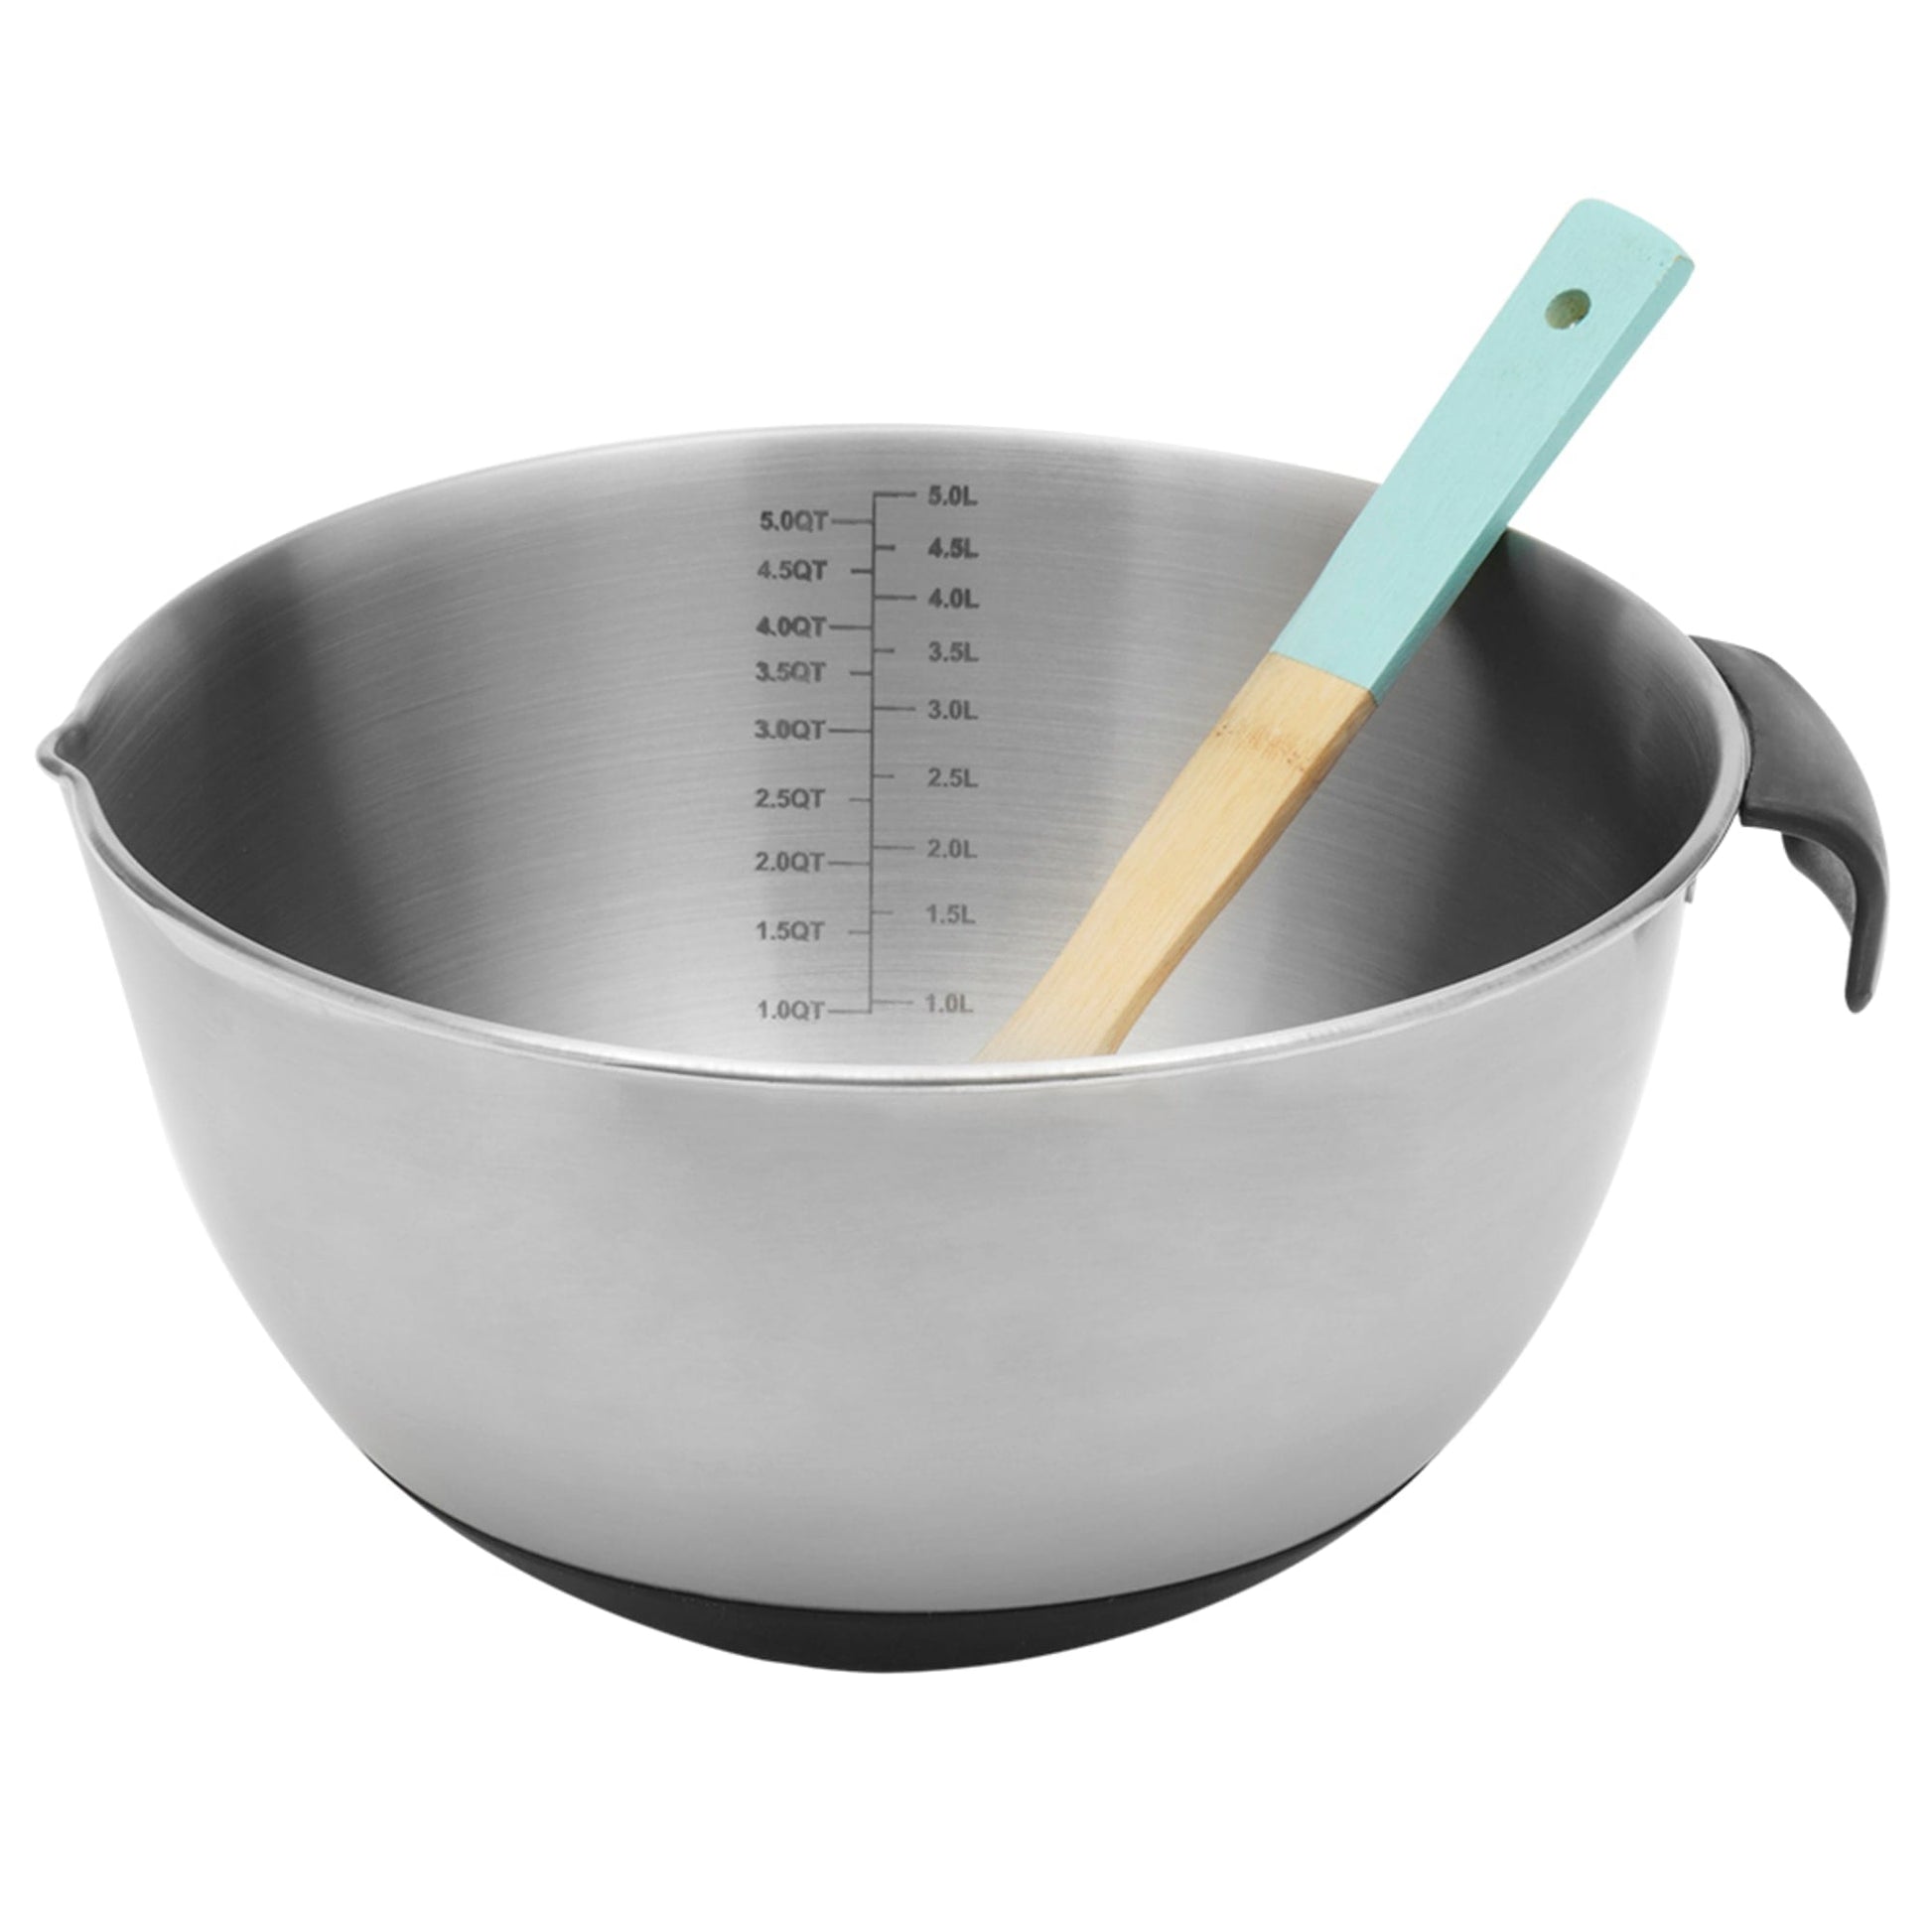 Wholesale Stainless Steel Mixing Bowls - 5 Quart